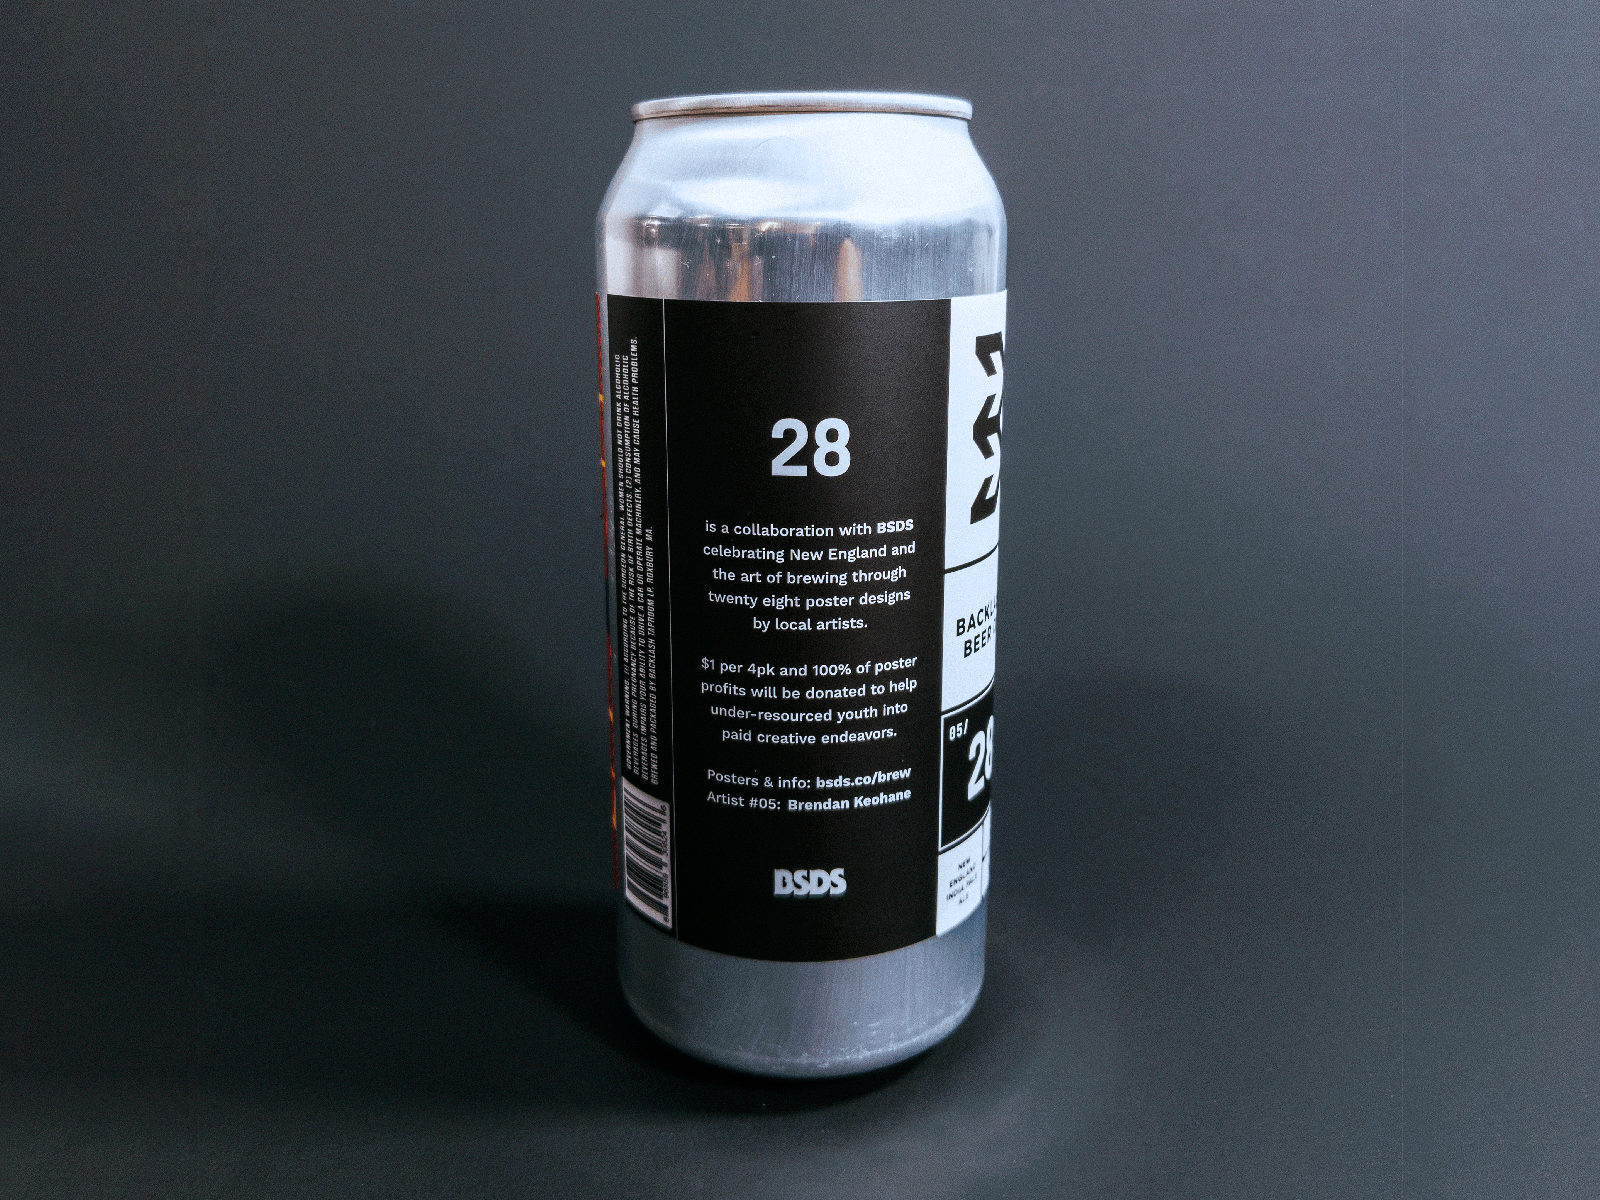 BSDS x Backlash "28" Beer Can Label Series boston brand branding brew brewery can design england label label packaging layout massachusetts new poster type typography